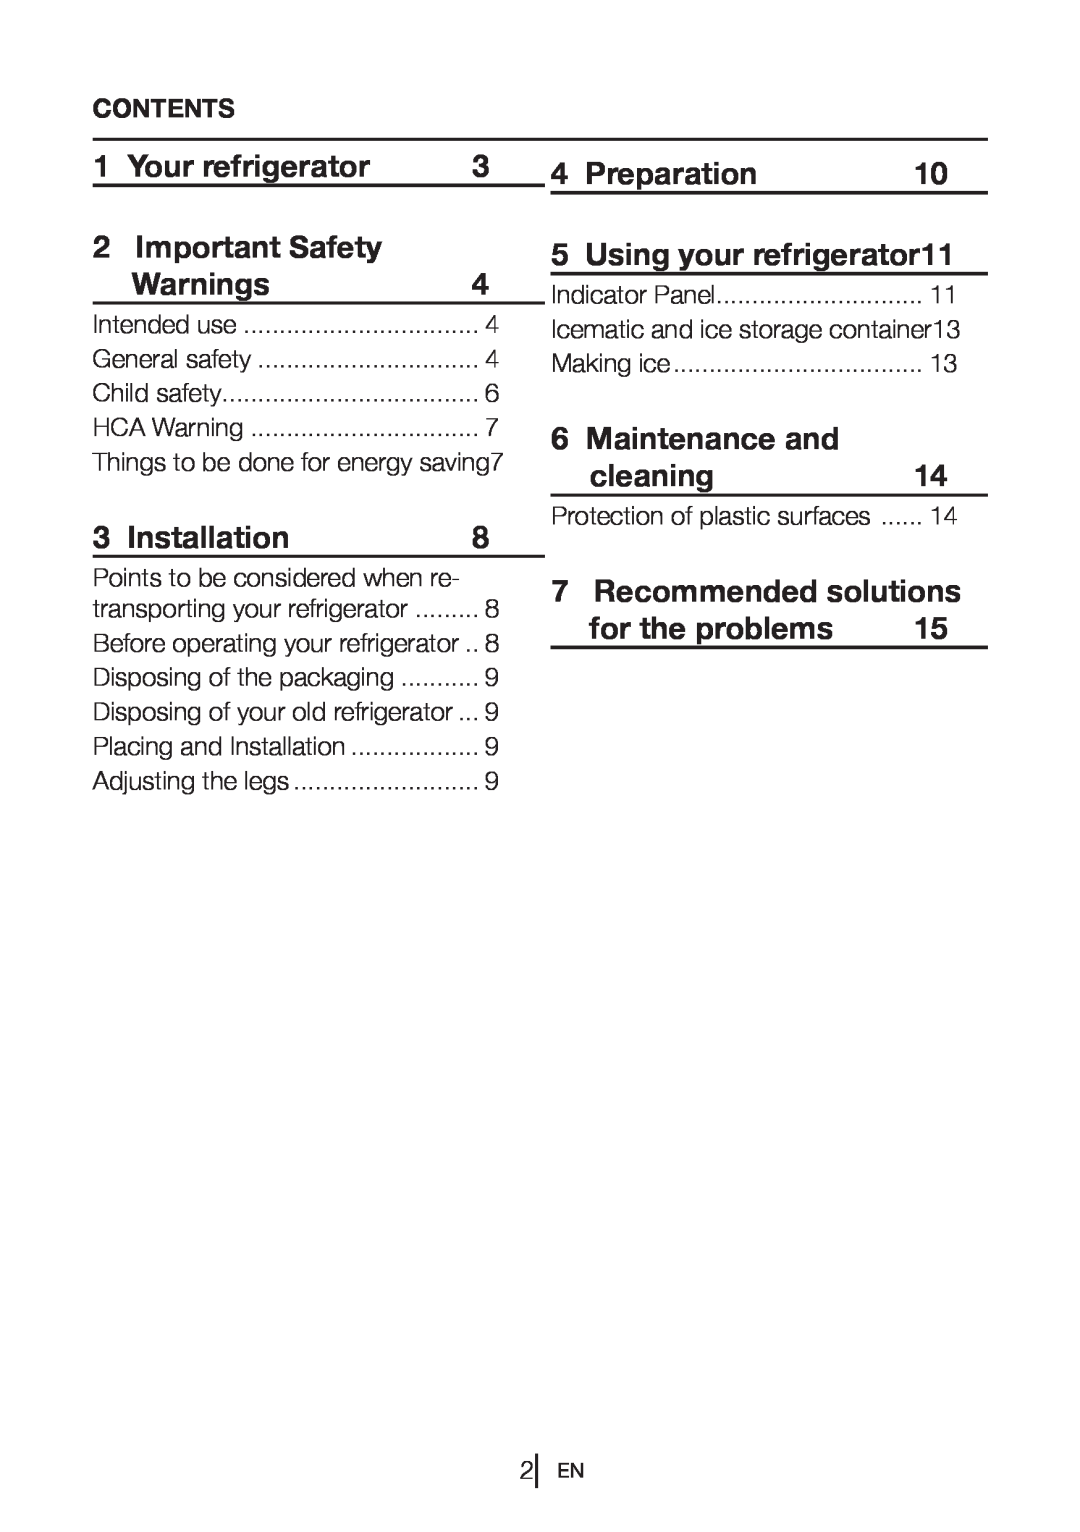 Blomberg FNT 9670 XT Your refrigerator, 2Important Safety Warnings4, Installation, Preparation, Using your refrigerator11 